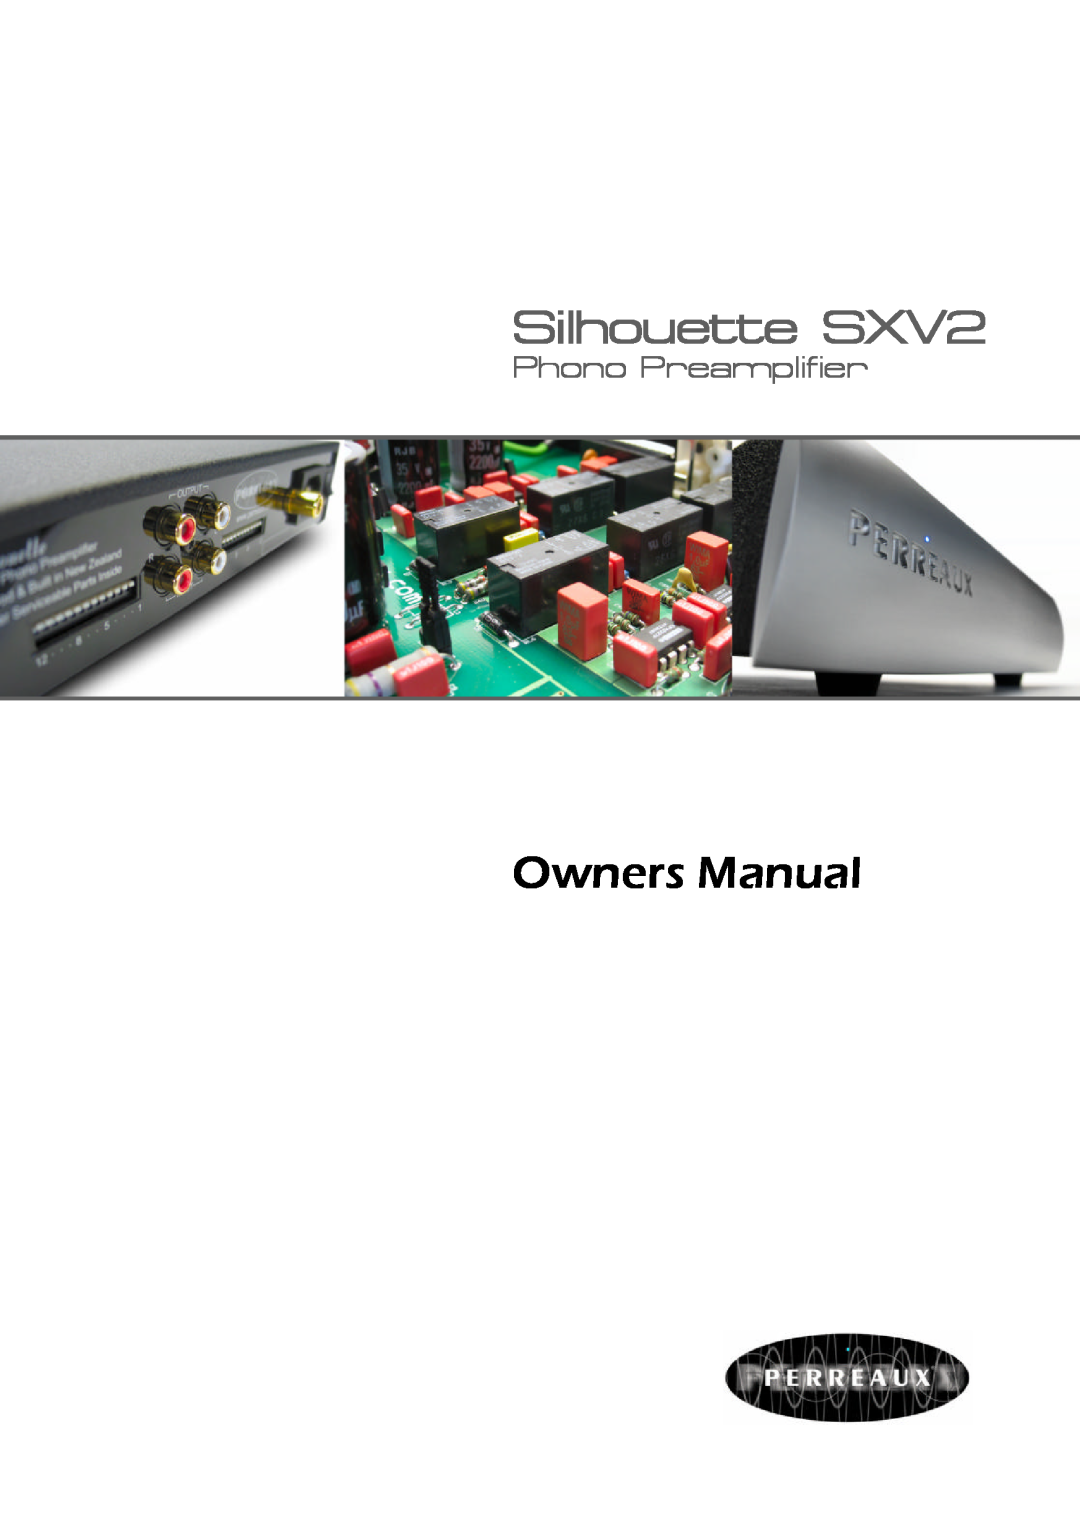 Perreaux owner manual Silhouette SXV2, Phono Preamplifier 